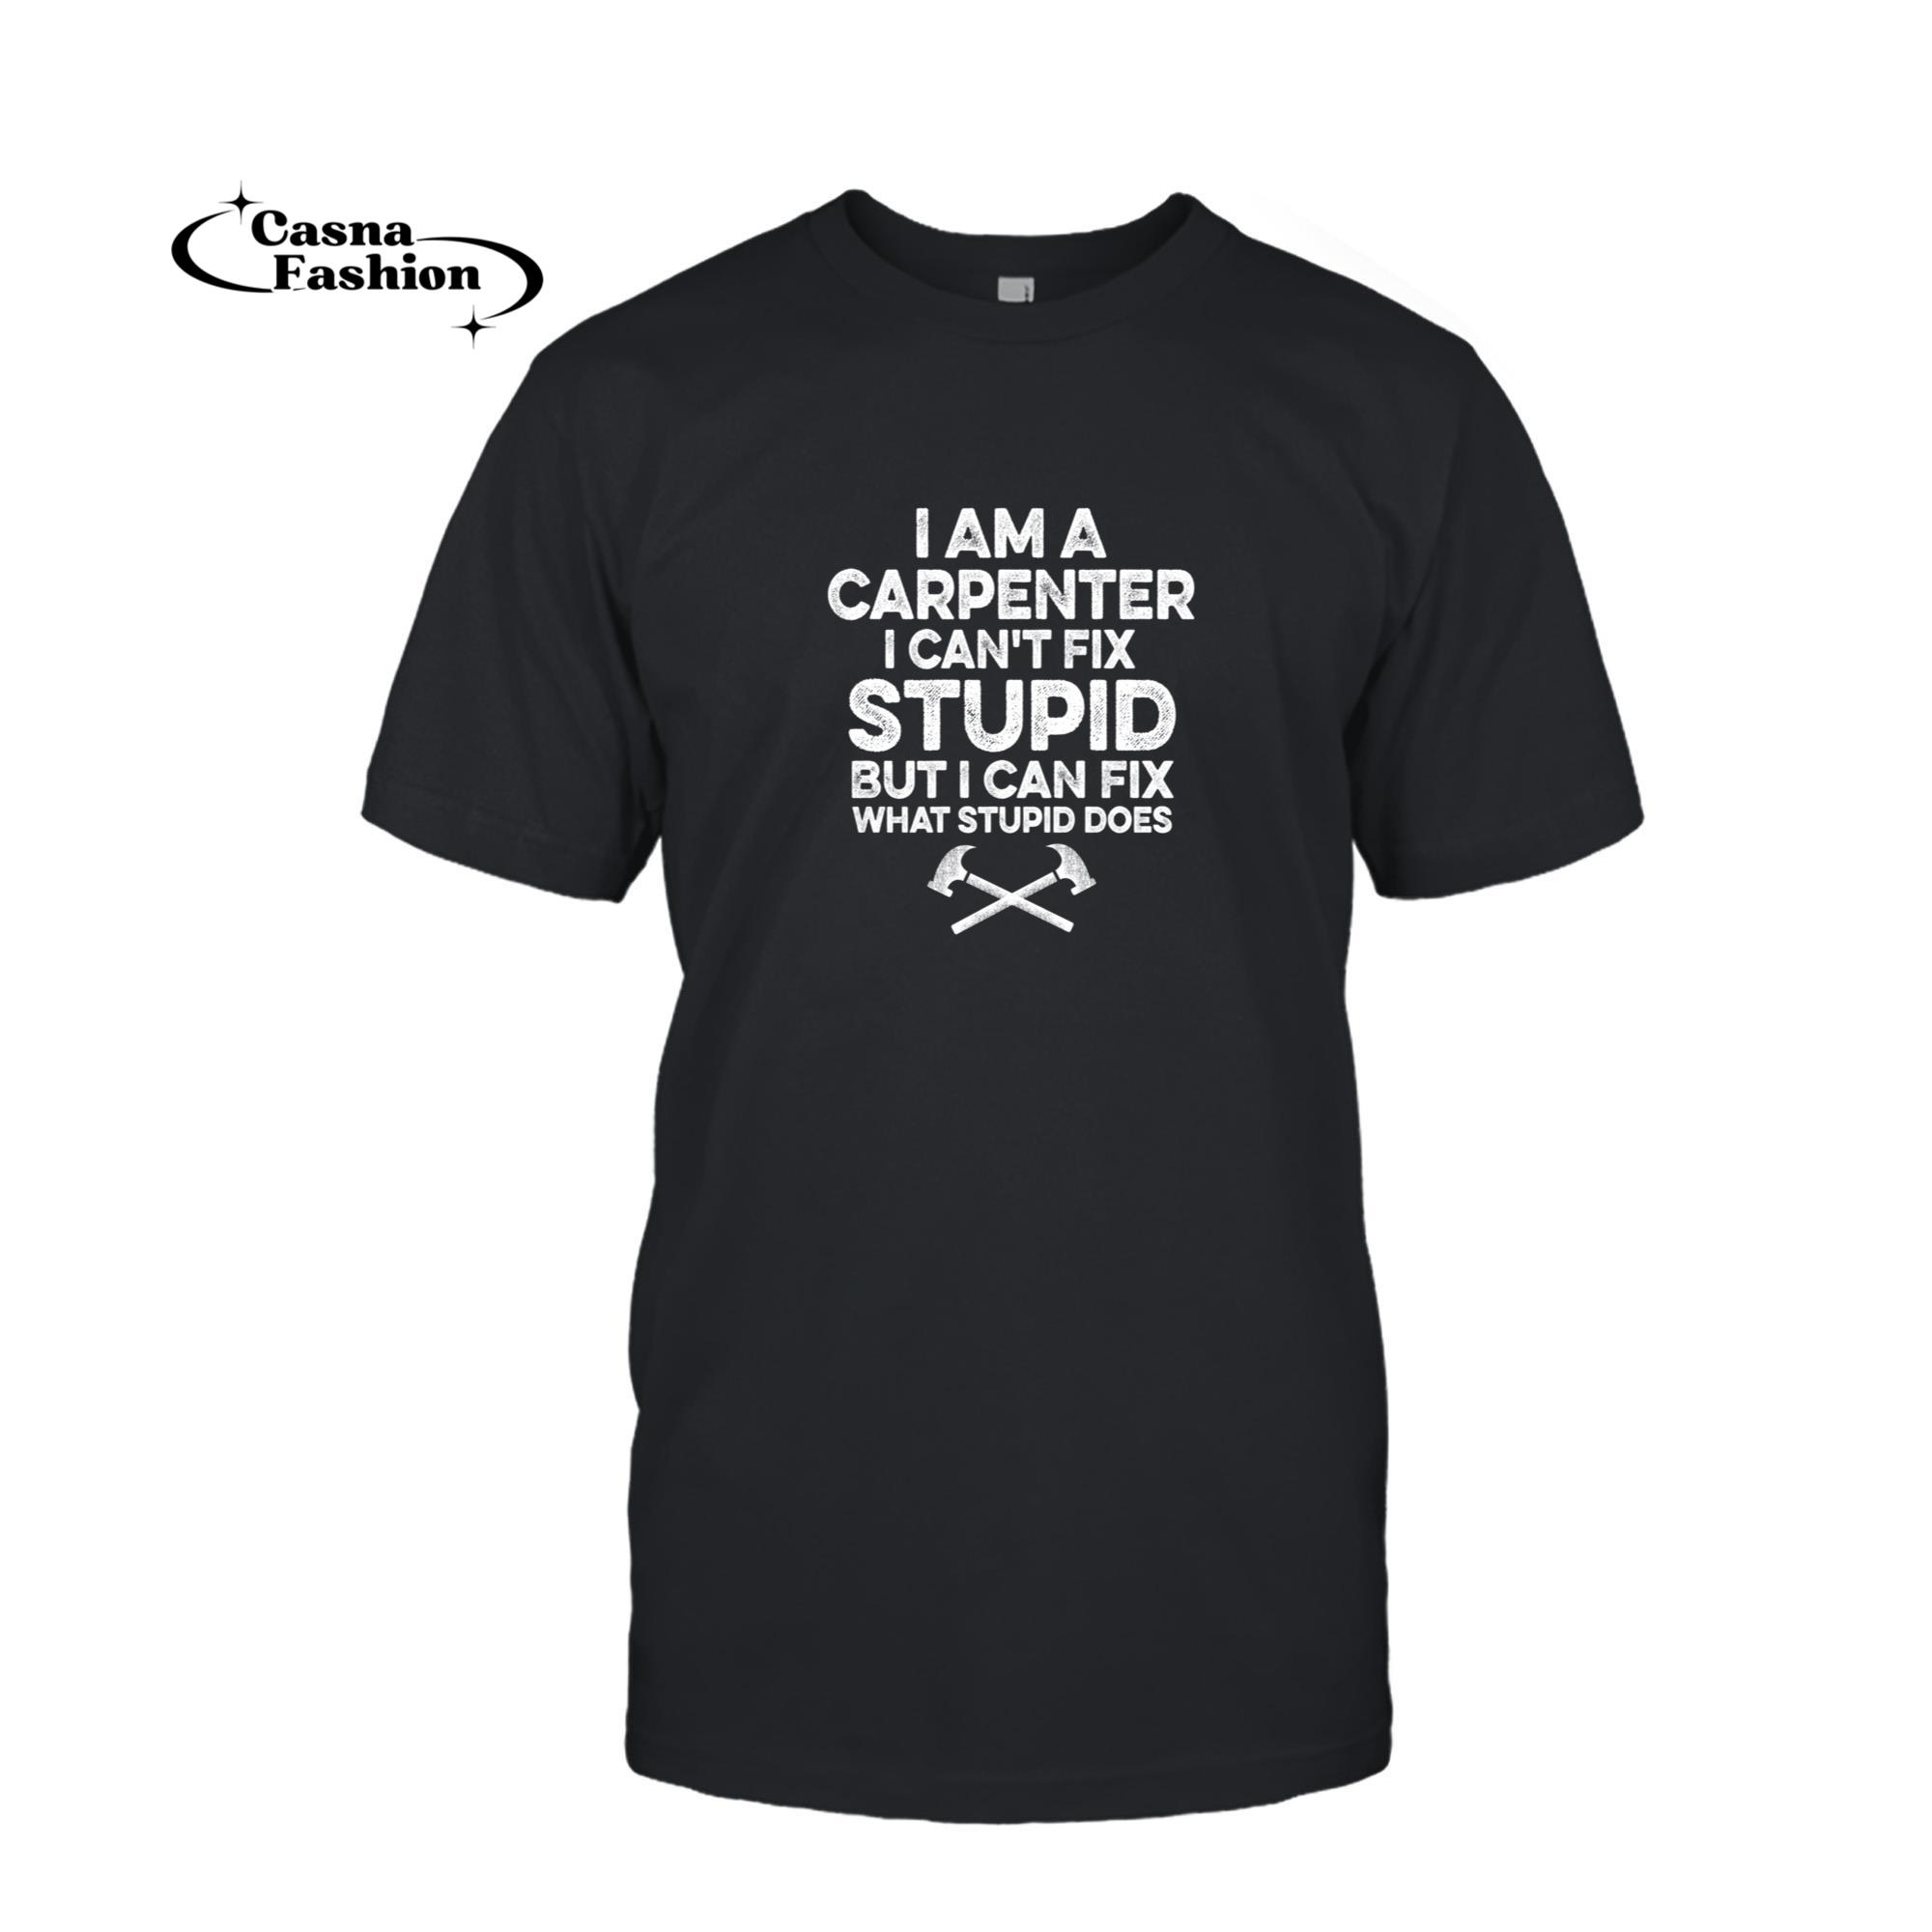 casnafashion_T-shirt_I am A Carpenter I Can't Fix Stupid Funny Carpentry Gift Pullover Hoodie_T-shirt_Black